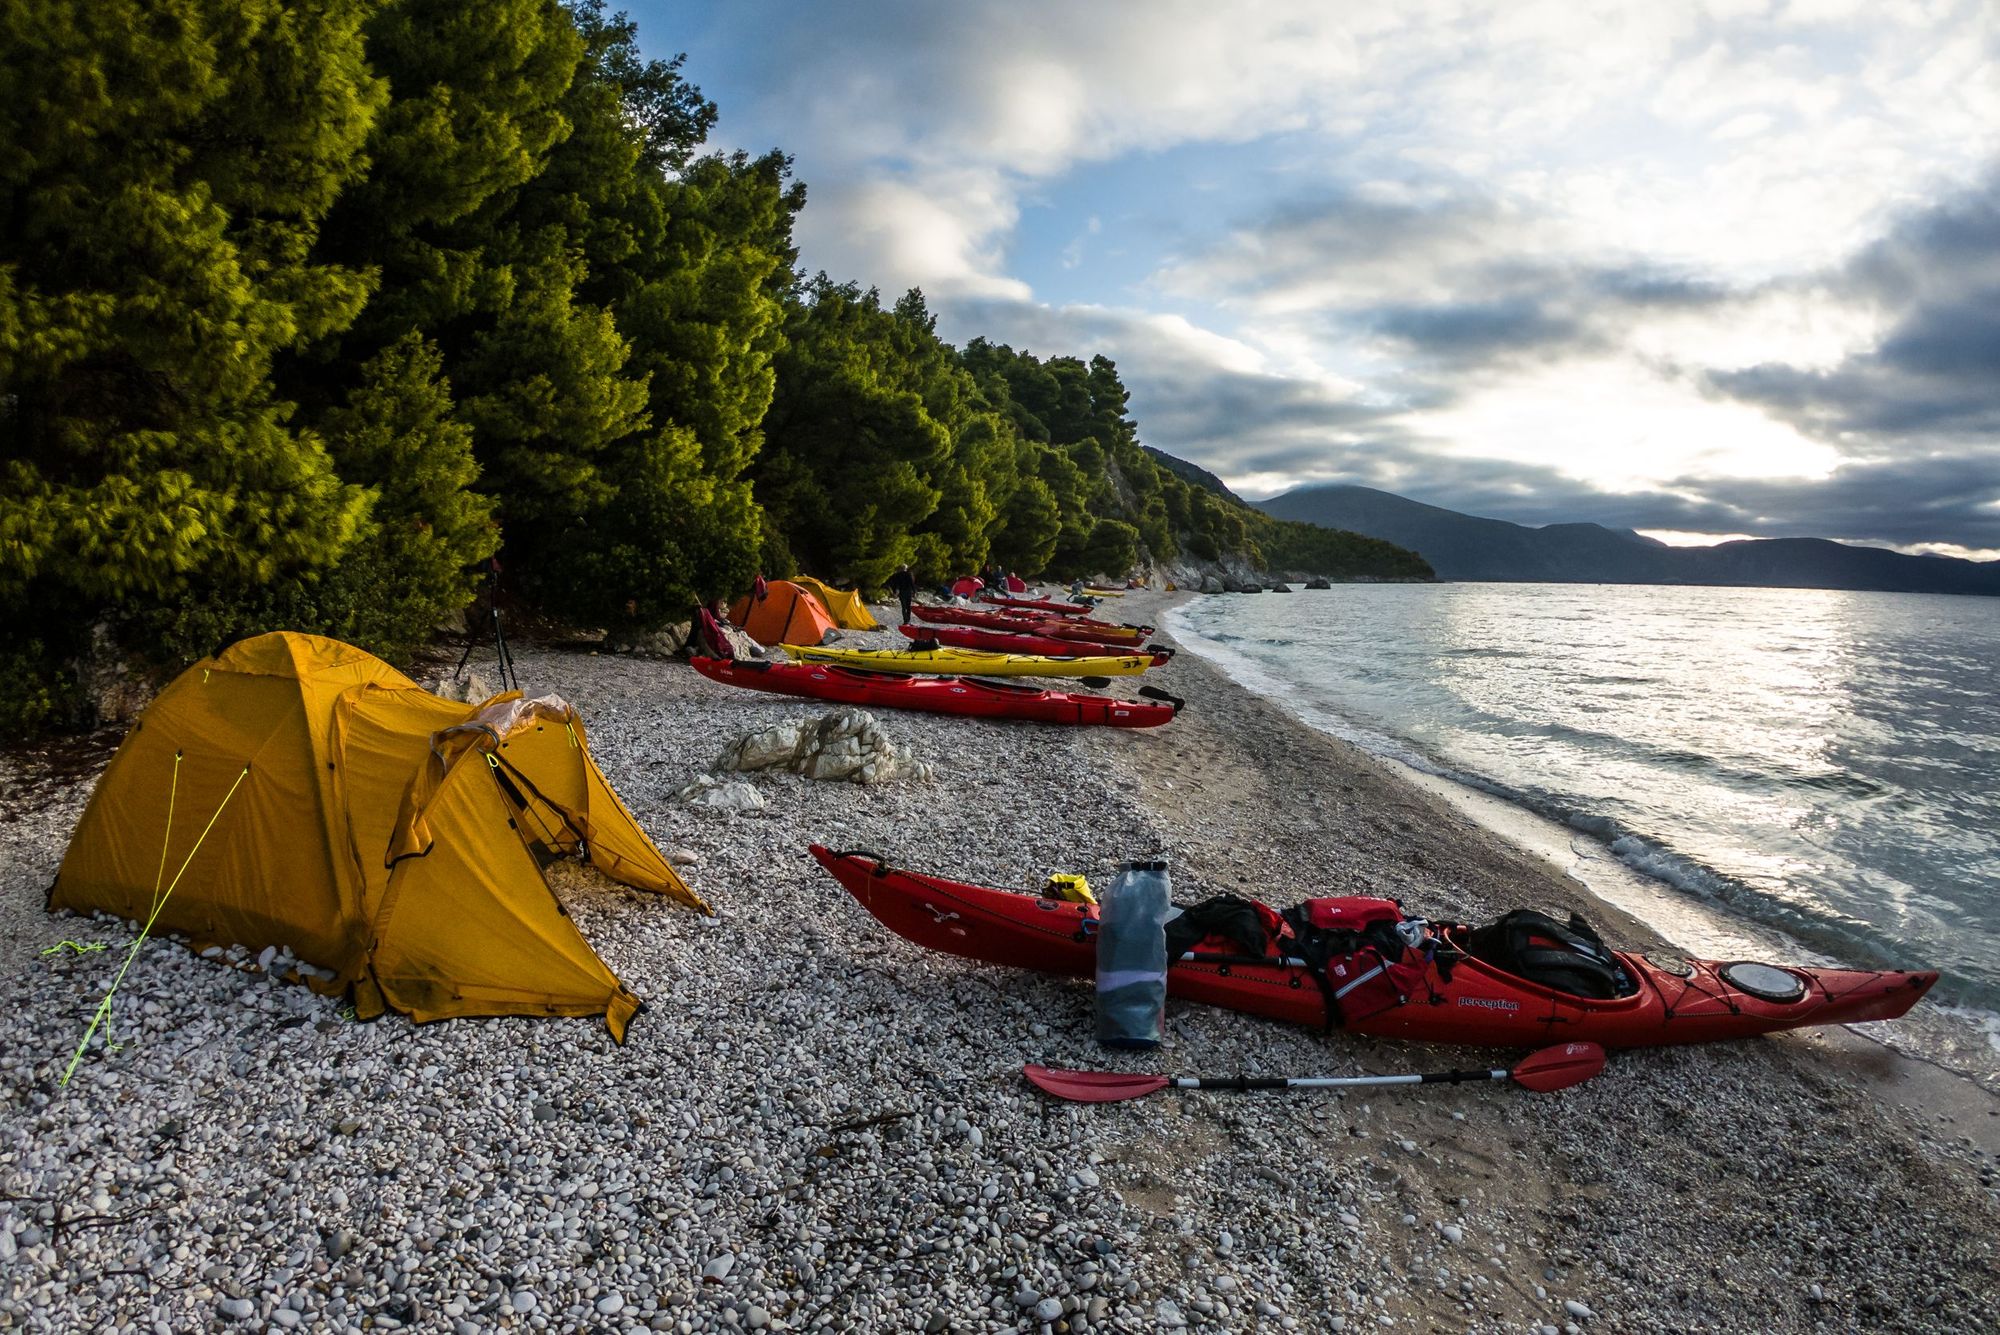 A secluded beach campsite on the Ionian Archipelago